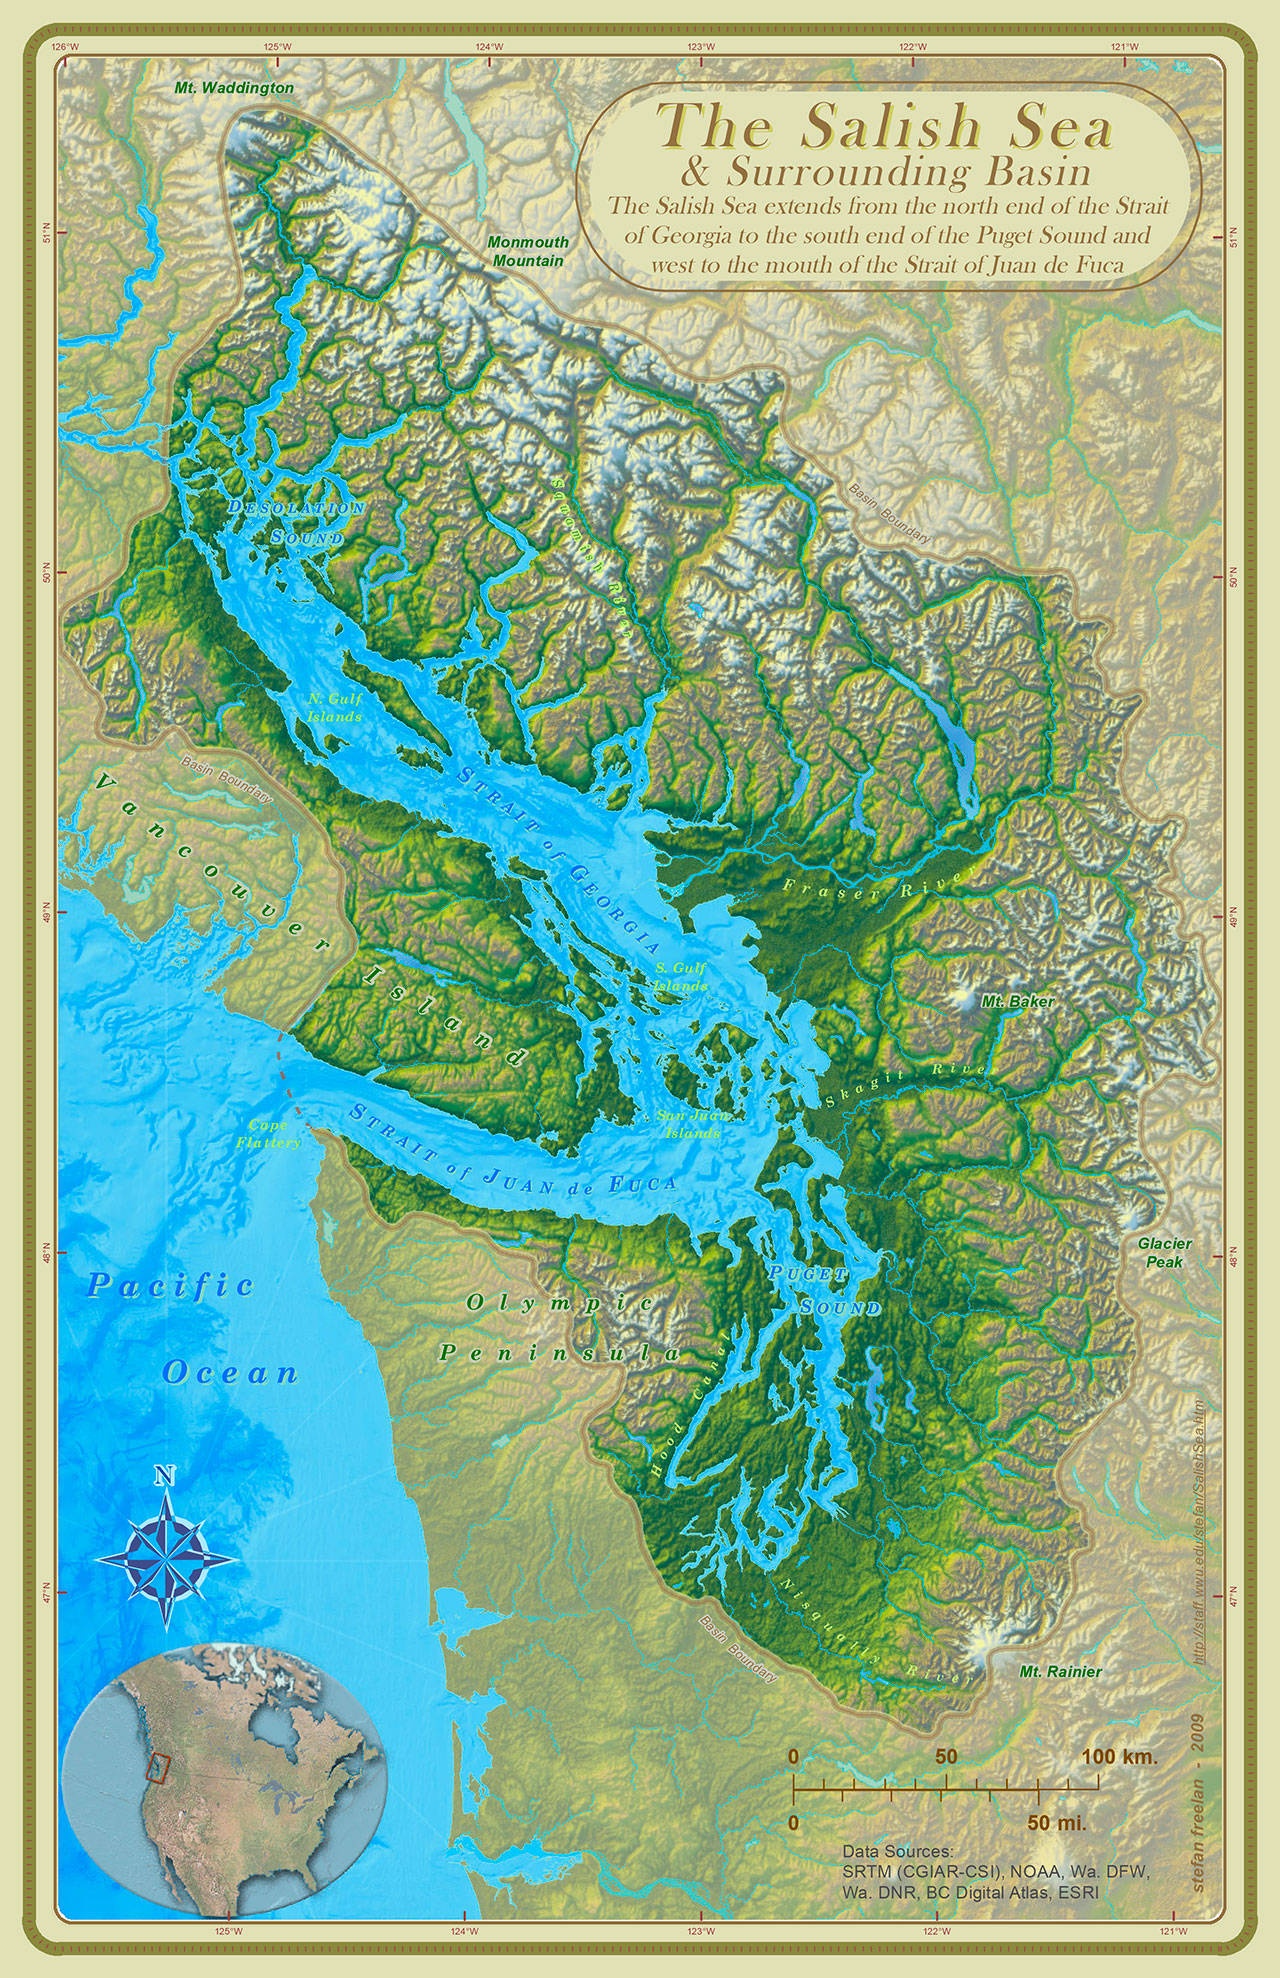 The single estuary ecosystem officially named the Salish Sea by British Columbia and Washington State in 2009 extends from the north end of the Strait of Georgia and Desolation Sound to the south end of the Puget Sound and west to the mouth of the Strait of Juan de Fuca. (Map of the Salish Sea and Surrounding Basin, Stefan Freeman, WWU, 2009)